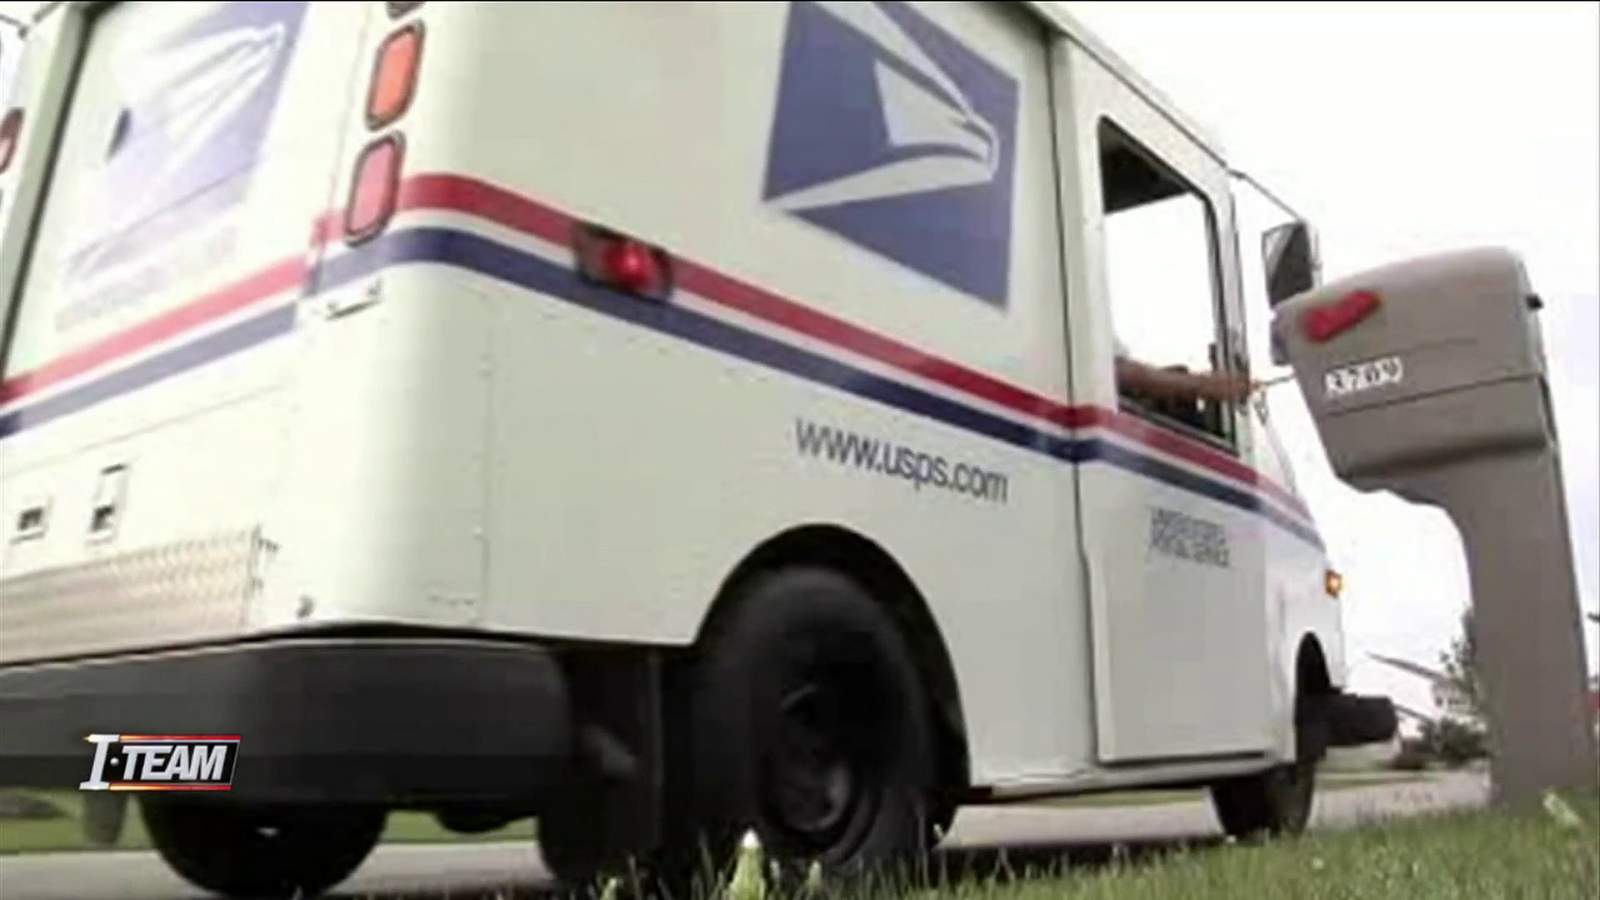 Judge orders USPS to provide info on service changes